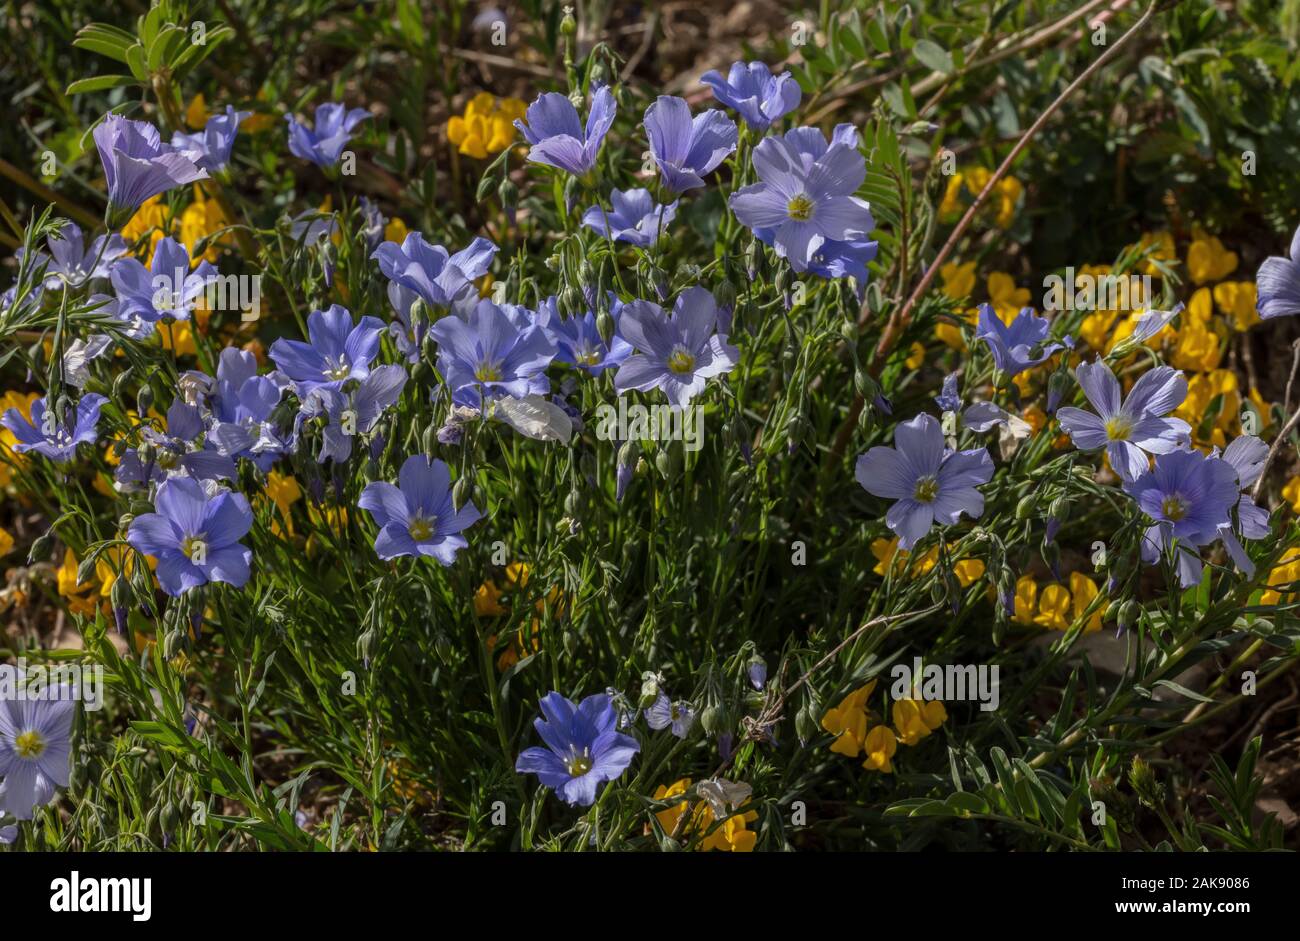 An alpine flax, Linum austriacum in flower in the french alps. Stock Photo